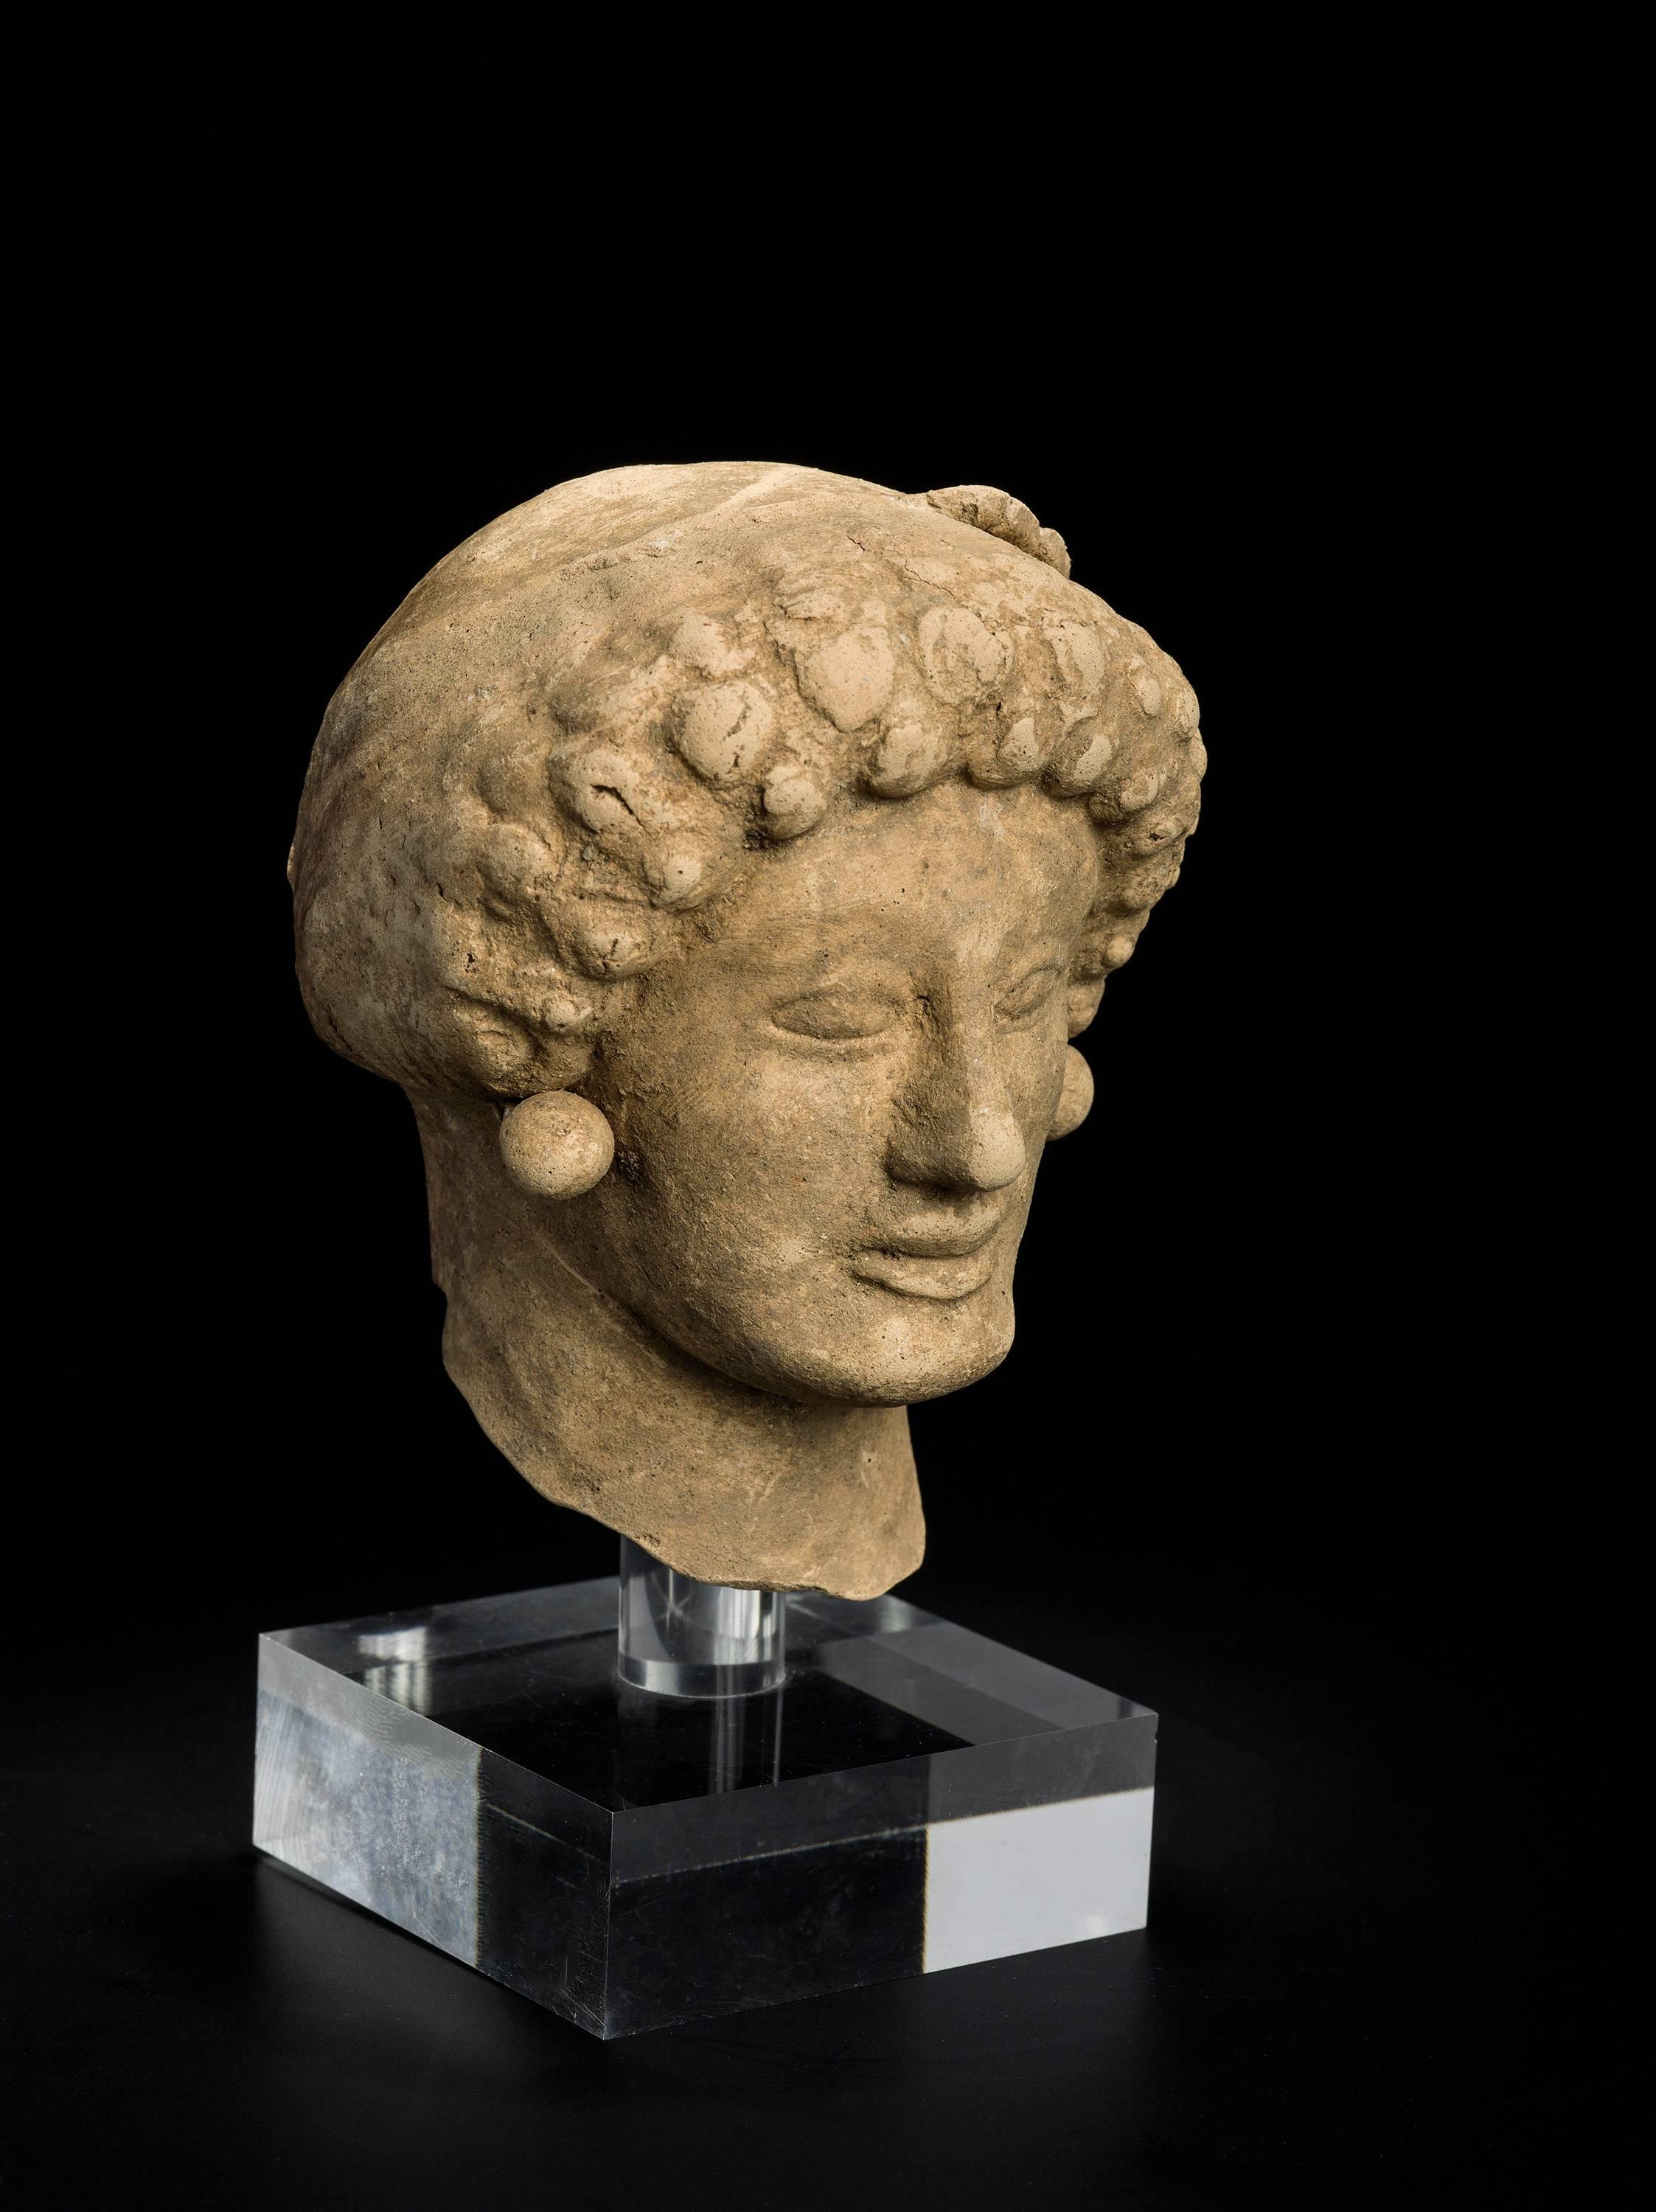 This votive head of a female is either depicting the donator or the sanctuary’s Goddess. The head originates from Medma, a ancient Greek colony in the Calabria peninsula, South Italy. The face is well modeled with almond shaped eyes and prominent